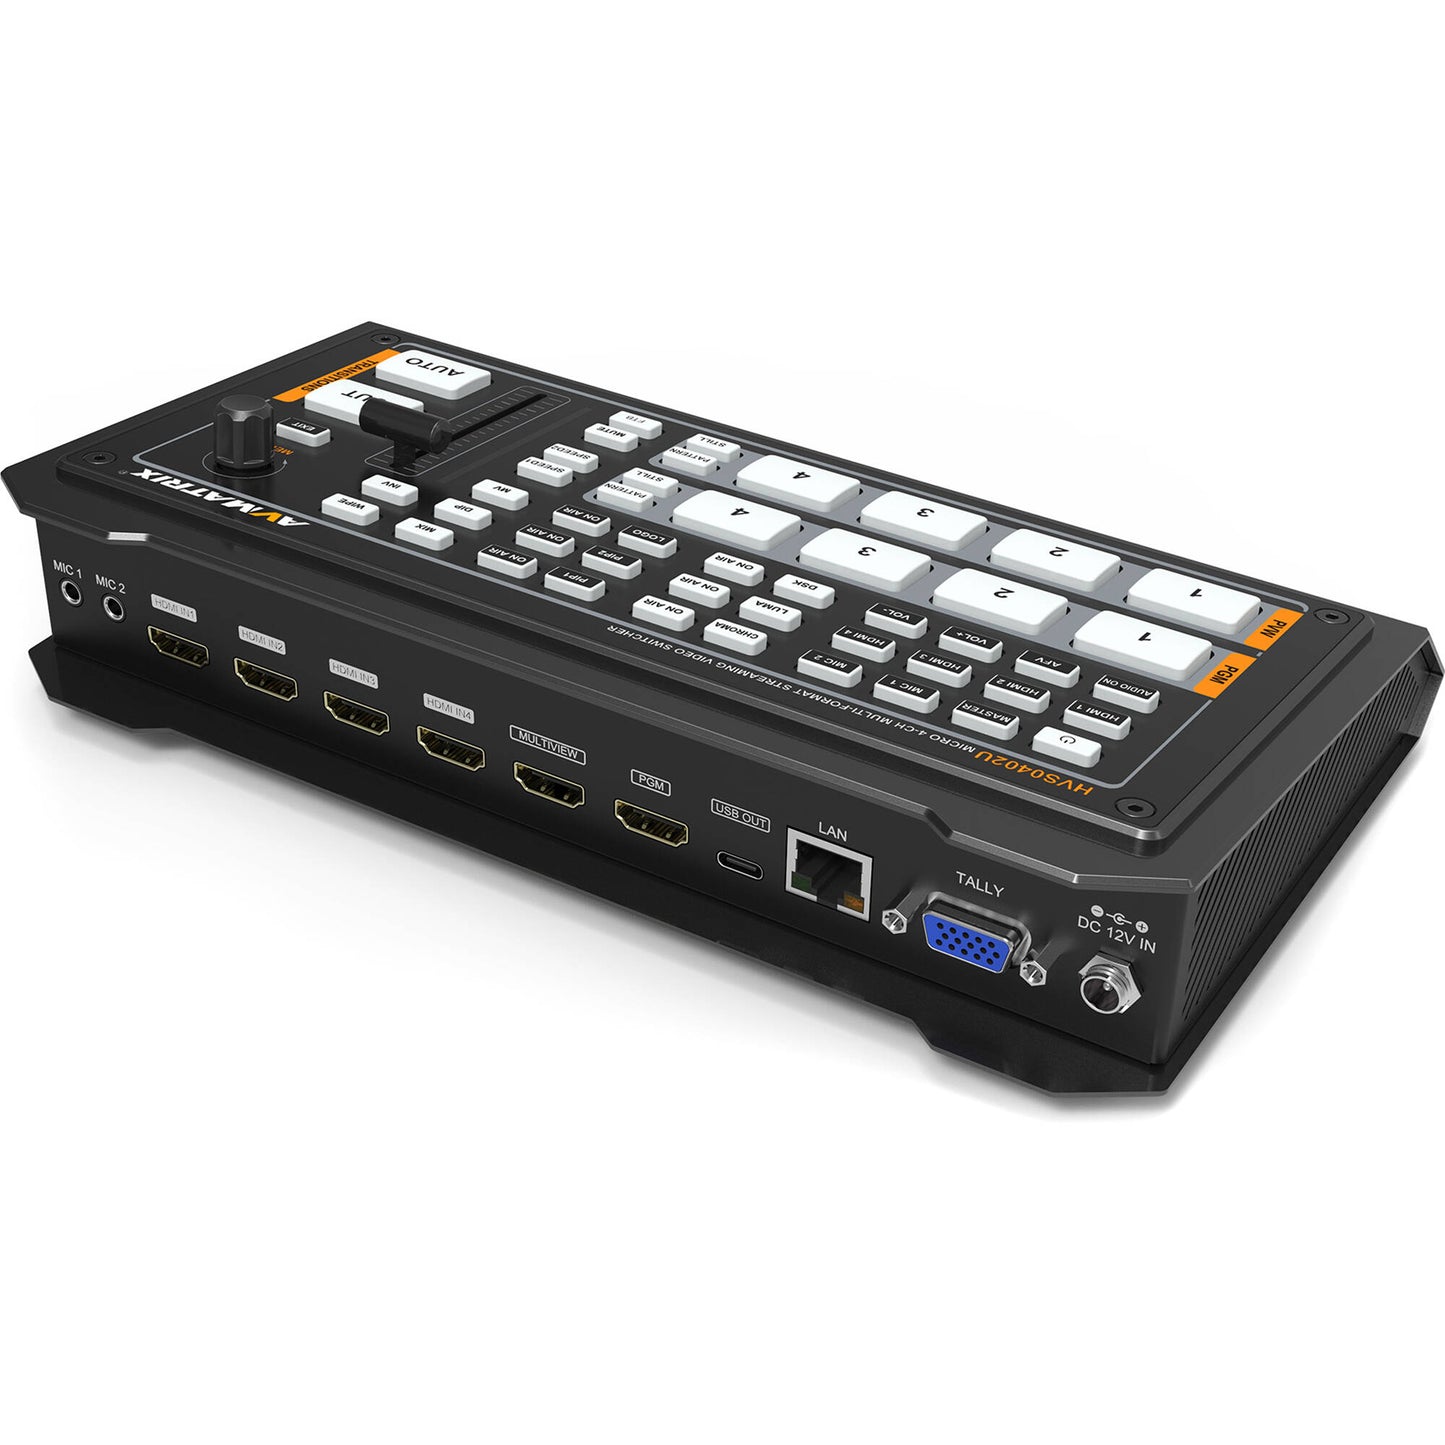 AVMatrix HVS0402U 4 Channel HDMI Live Streaming Video Switcher with T-bar/Auto/Cut Transition Effects, Chroma Key and Luma Key, 2 PIP/POP, 49 Preset Patterns, Audio Mixing/AFV and LAN Port for PC Control Software